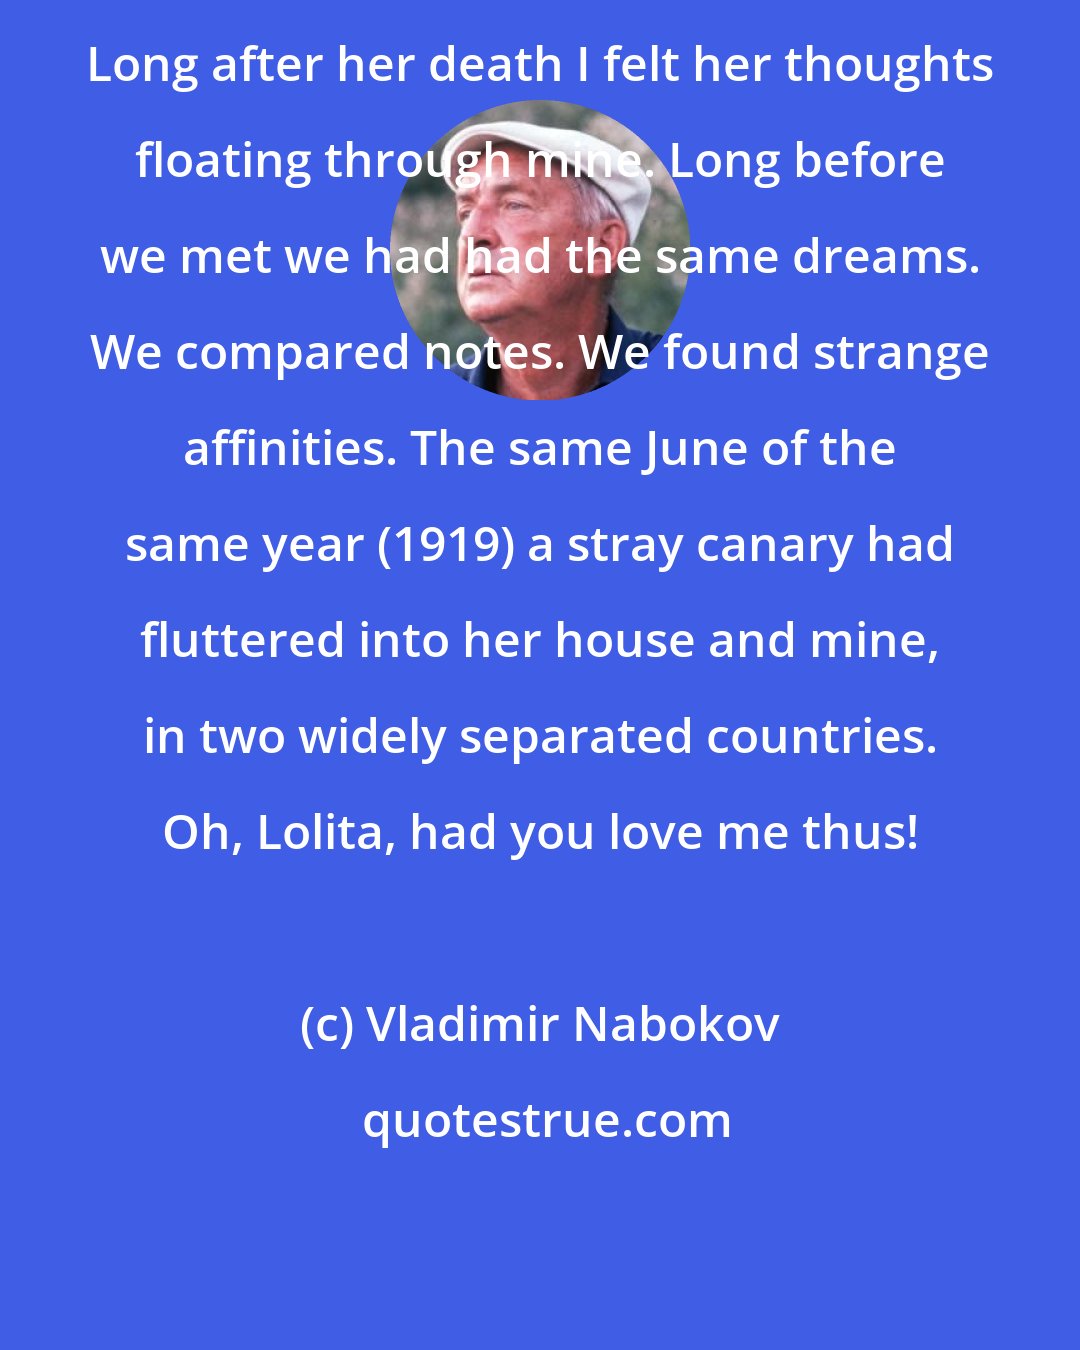 Vladimir Nabokov: Long after her death I felt her thoughts floating through mine. Long before we met we had had the same dreams. We compared notes. We found strange affinities. The same June of the same year (1919) a stray canary had fluttered into her house and mine, in two widely separated countries. Oh, Lolita, had you love me thus!